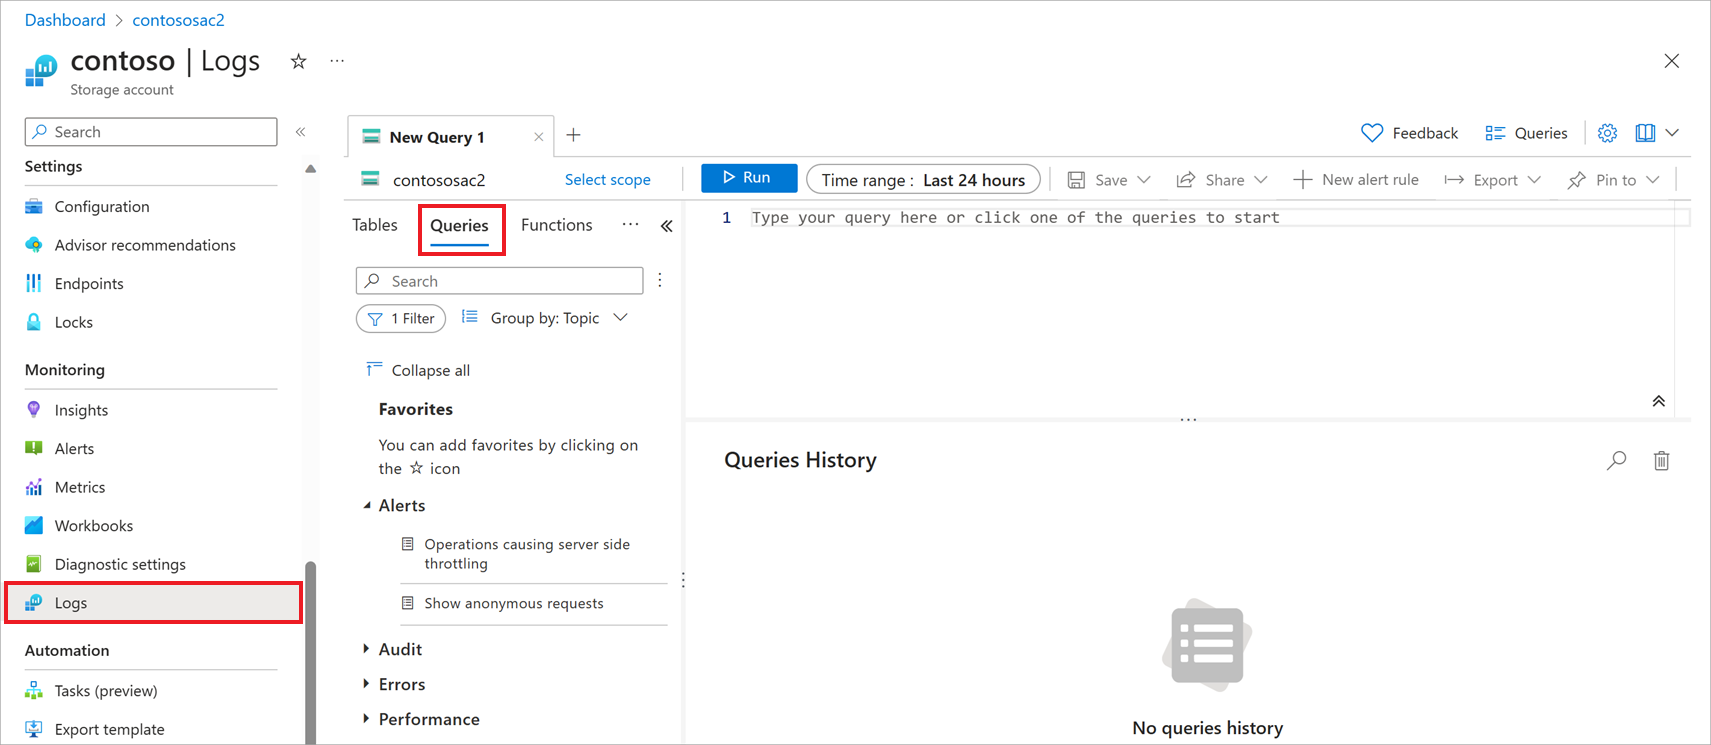 Screenshot of the Query pane in the Azure portal.